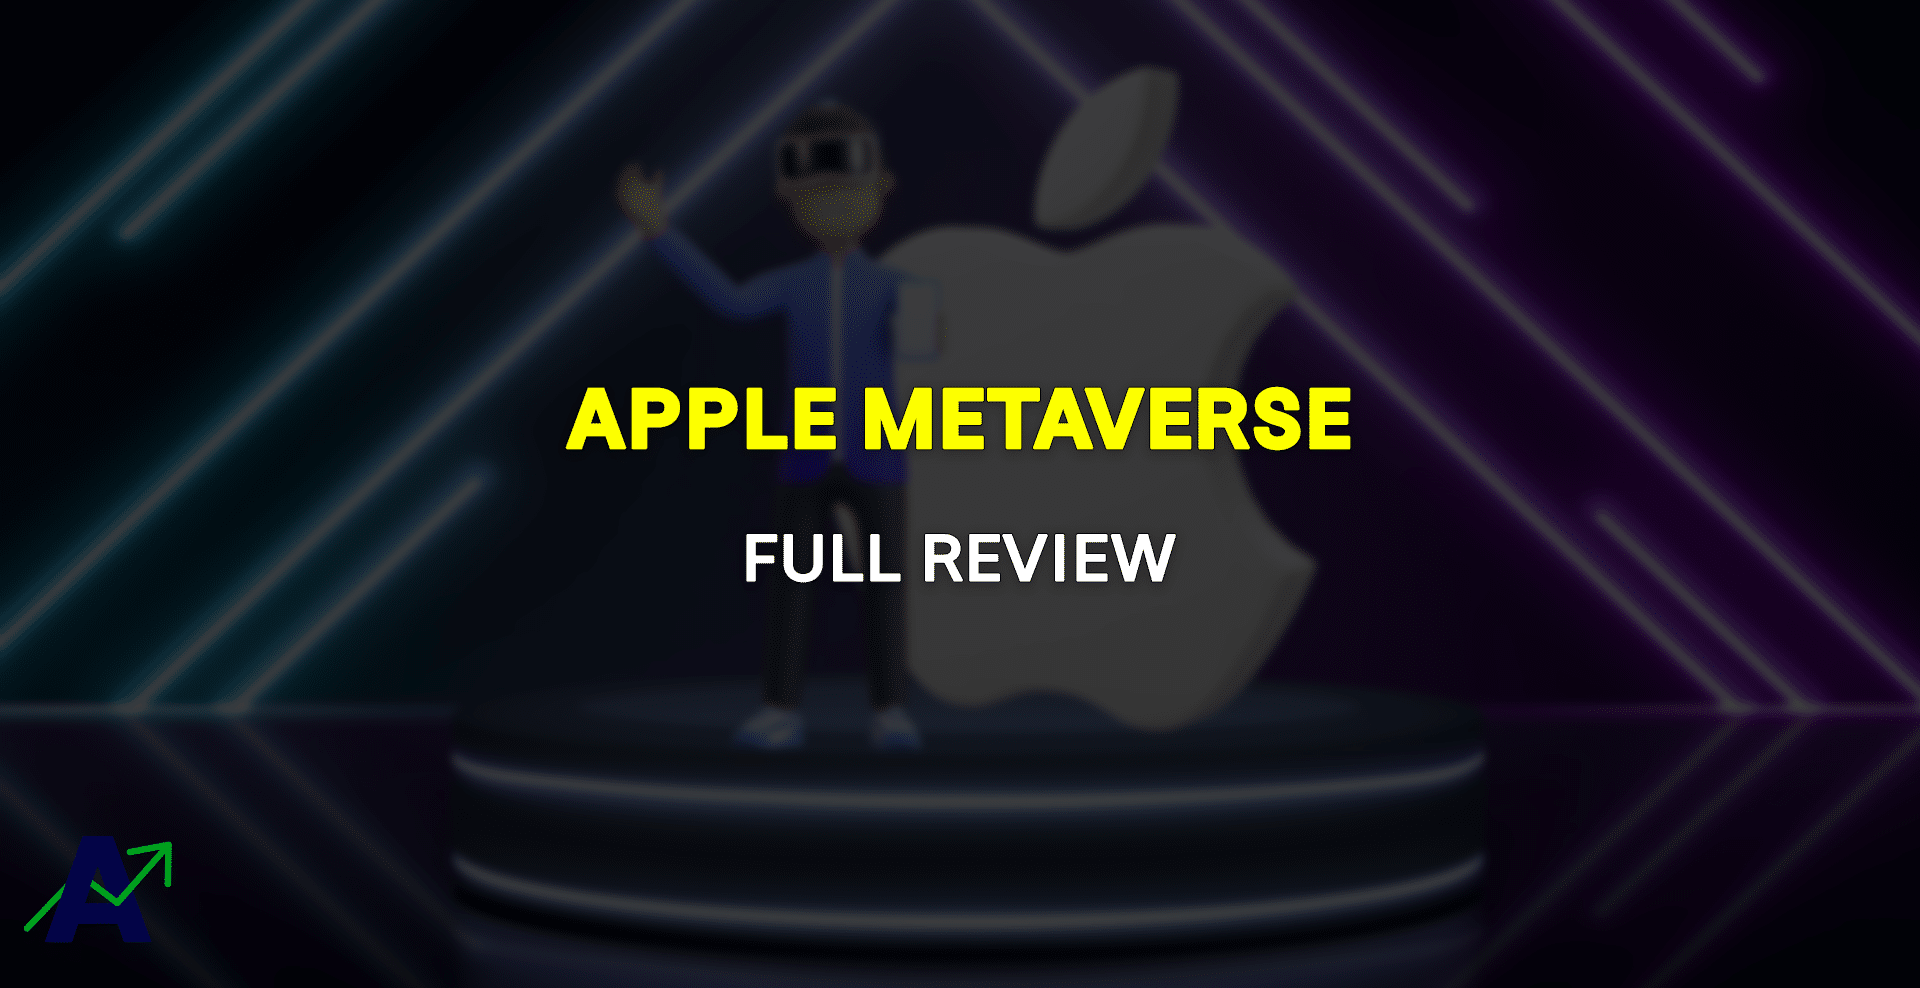 Apple and Metaverse - What is Apple's view of Metaverse